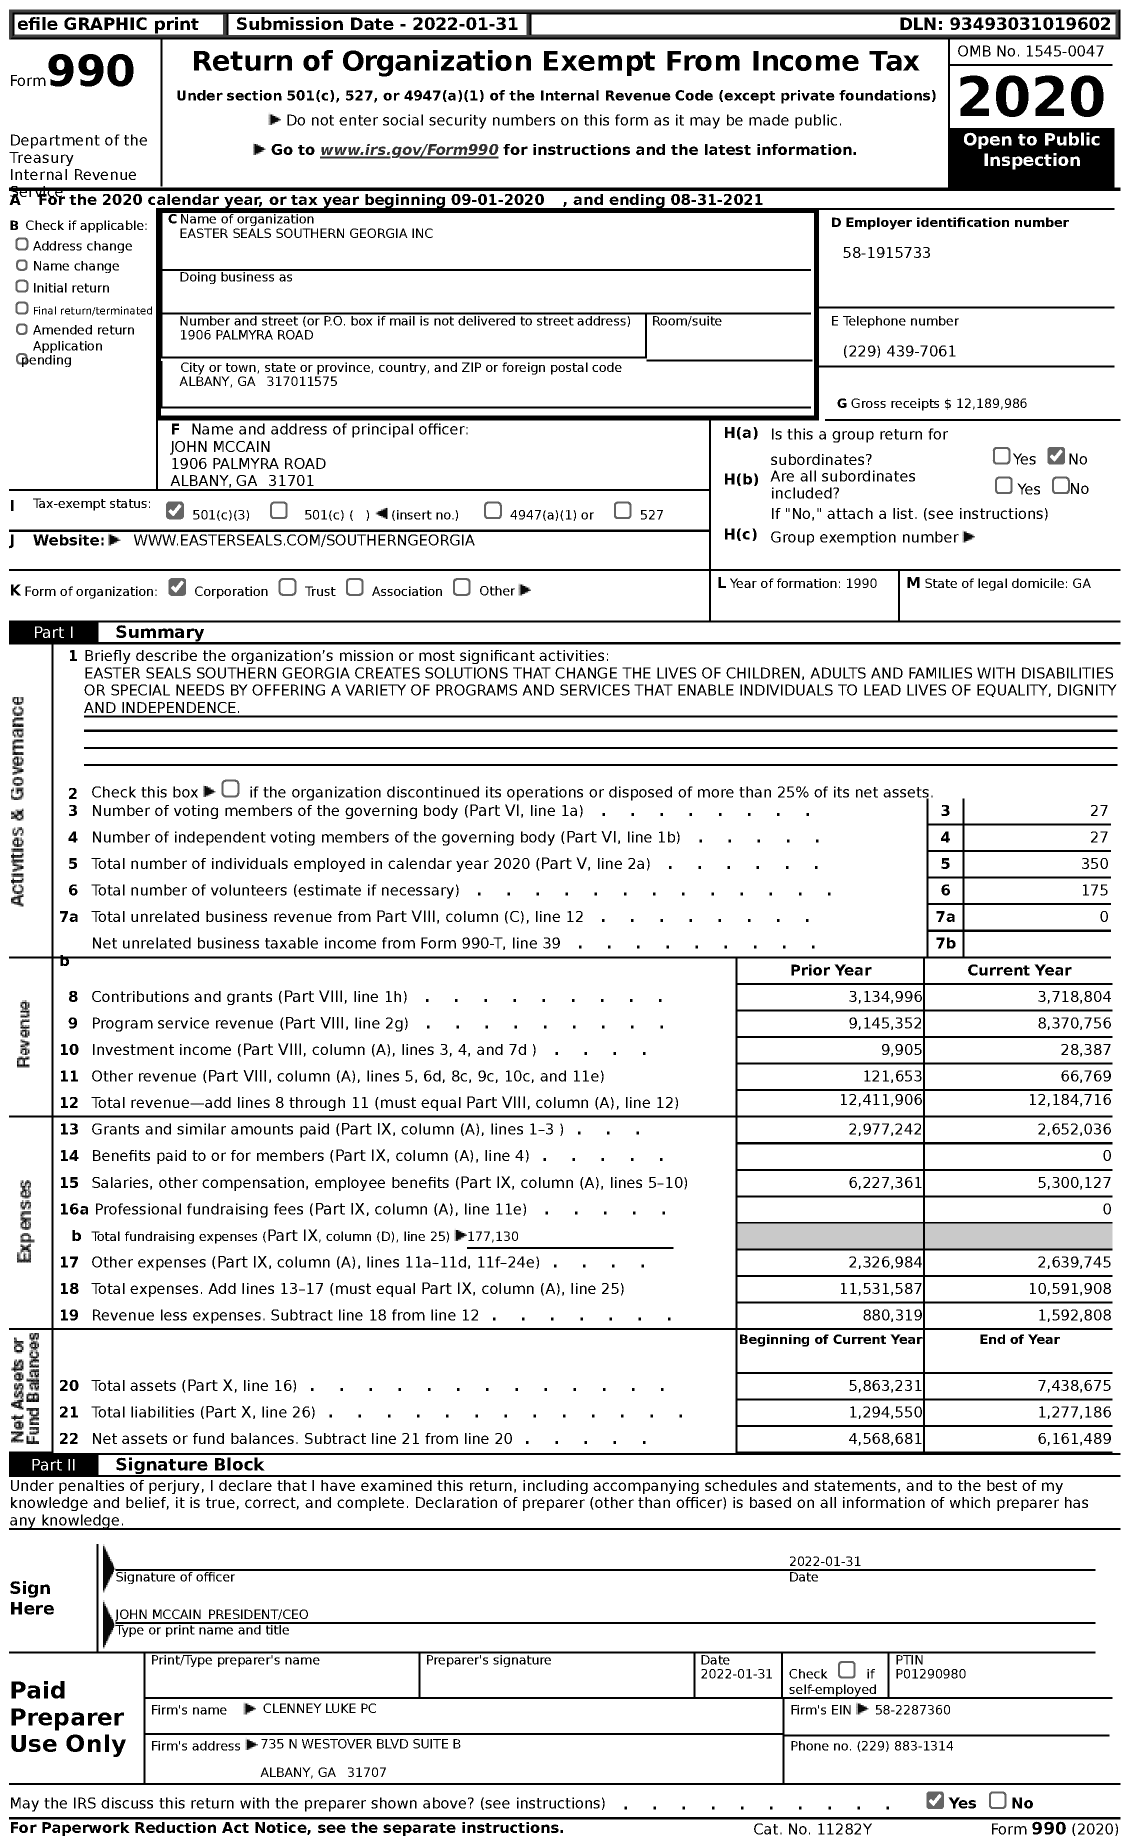 Image of first page of 2020 Form 990 for Easterseals Southern Georgia